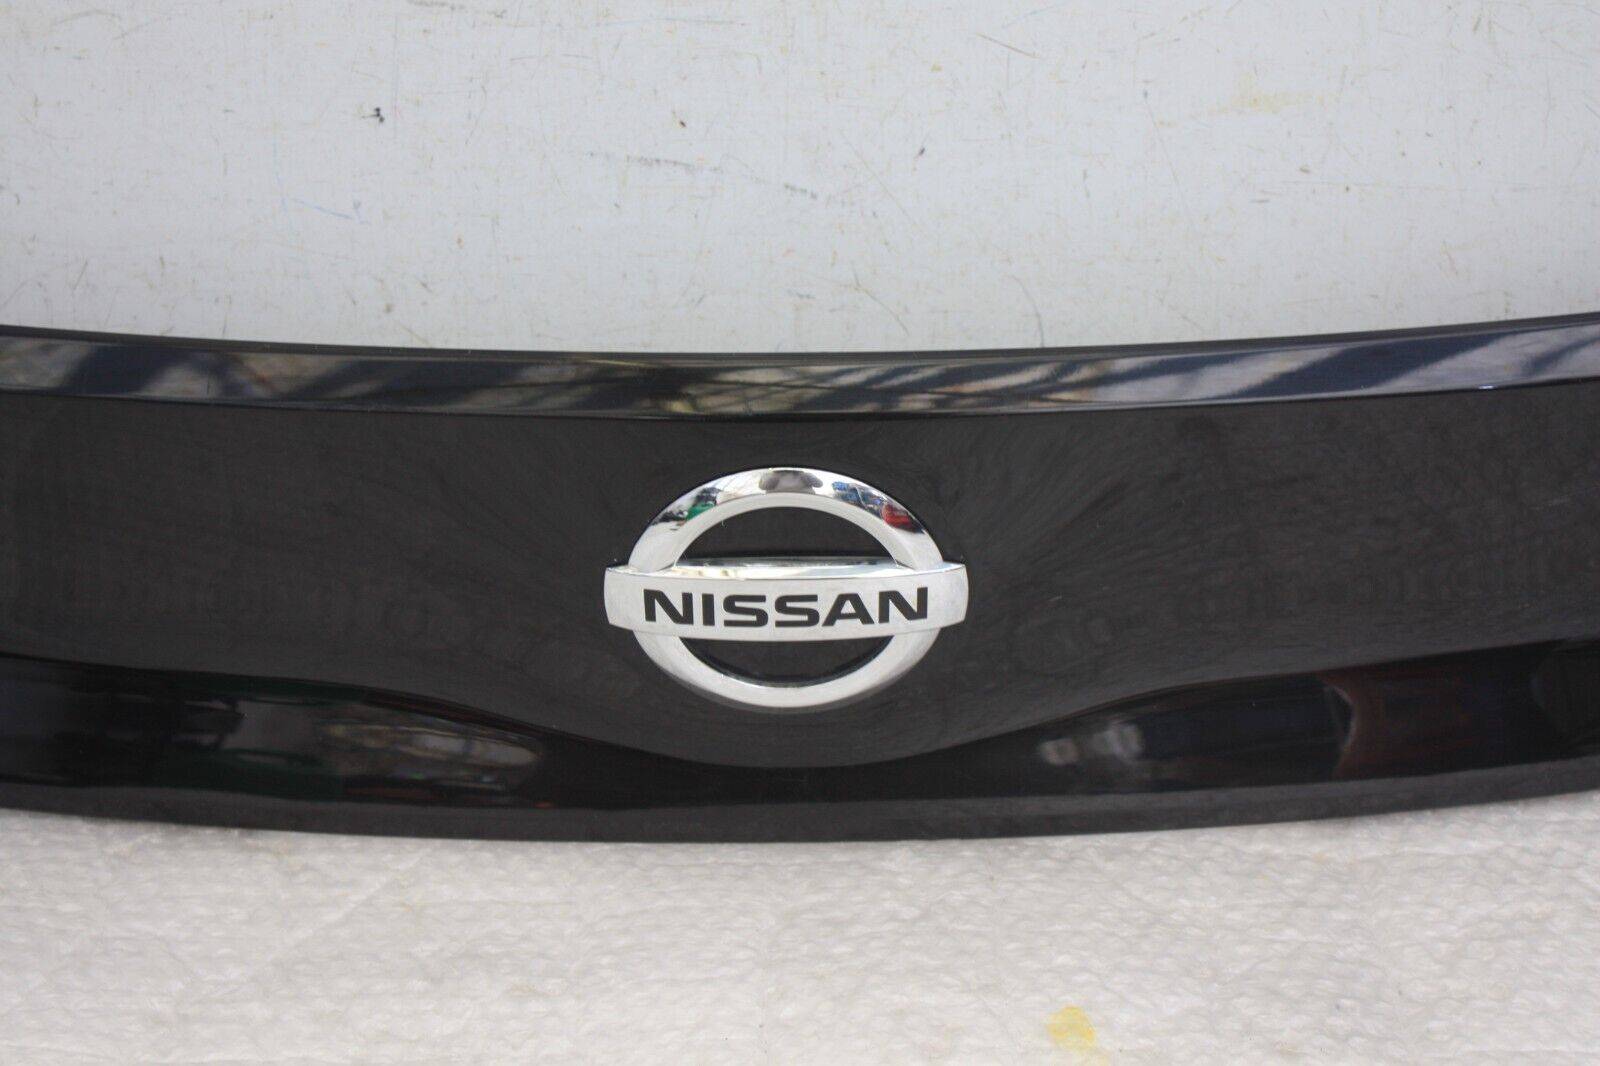 Nissan-Leaf-Rear-Tailgate-Trunk-Lid-Panel-Cover-Trim-90810-5SH0A-FIXING-DAMAGED-176365212247-3